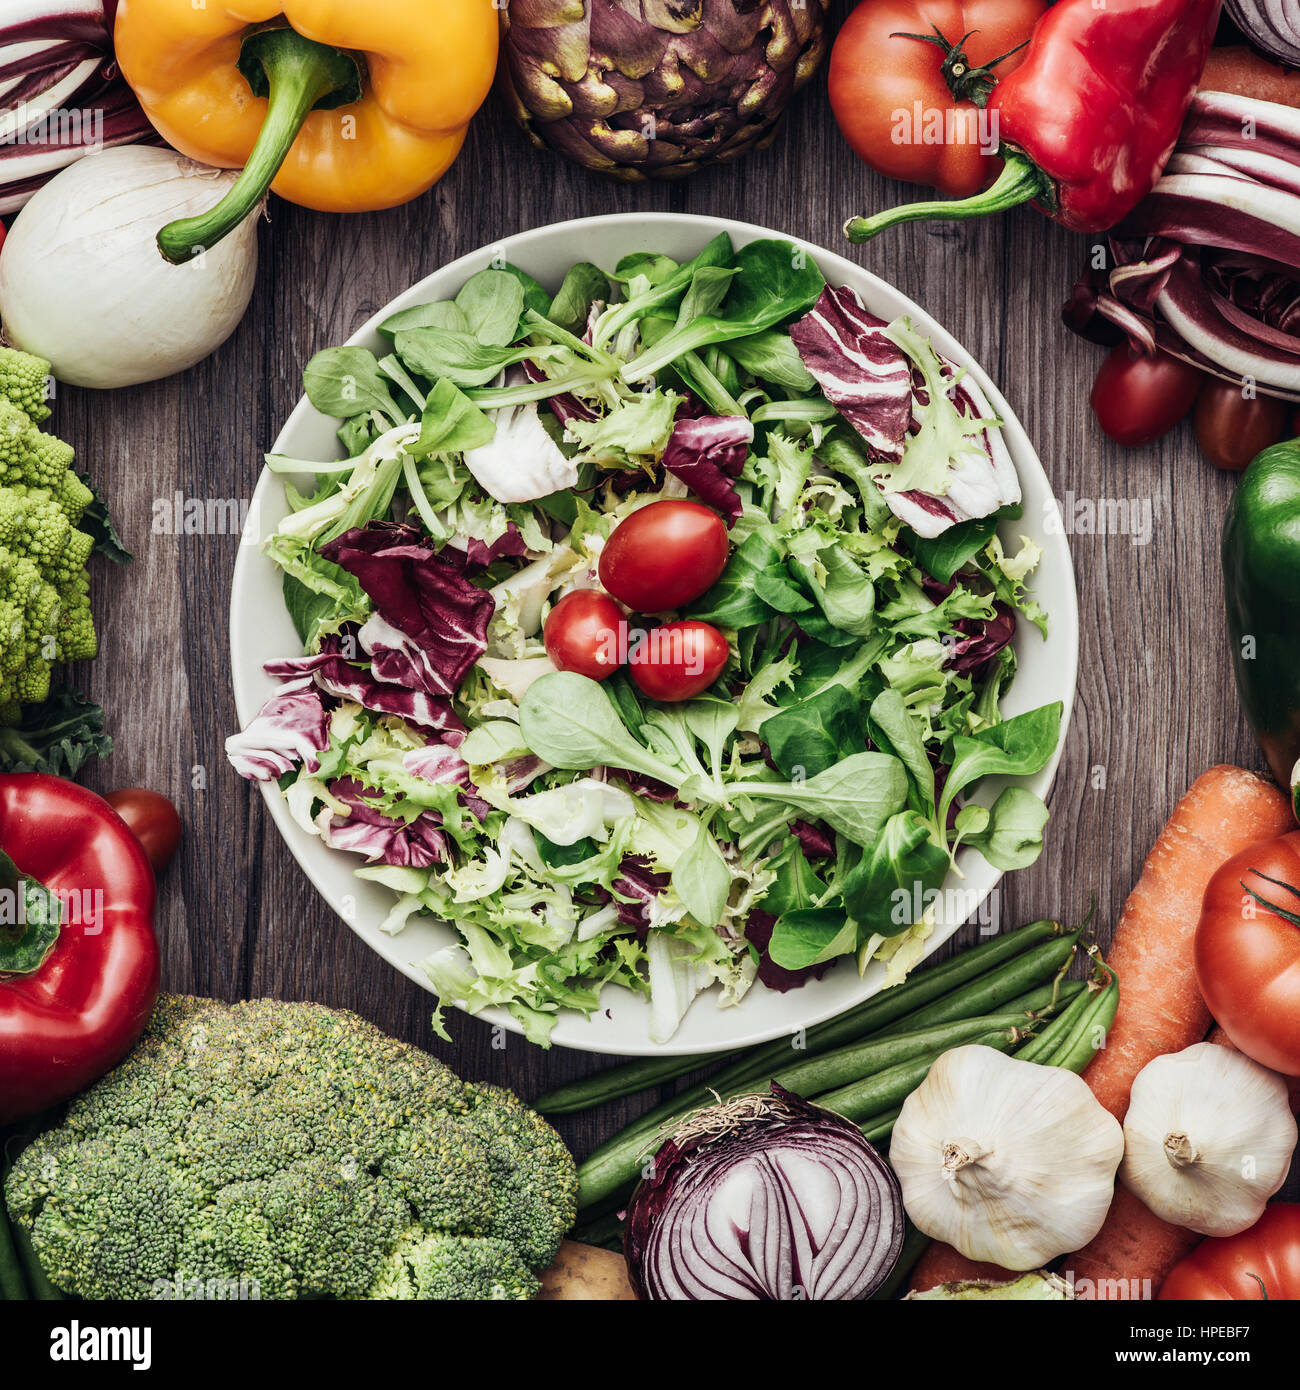 Fresh tasty vegetarian salad with seasonal ingredients surrounded by colorful vegetables, healthy vegetarian eating concept Stock Photo